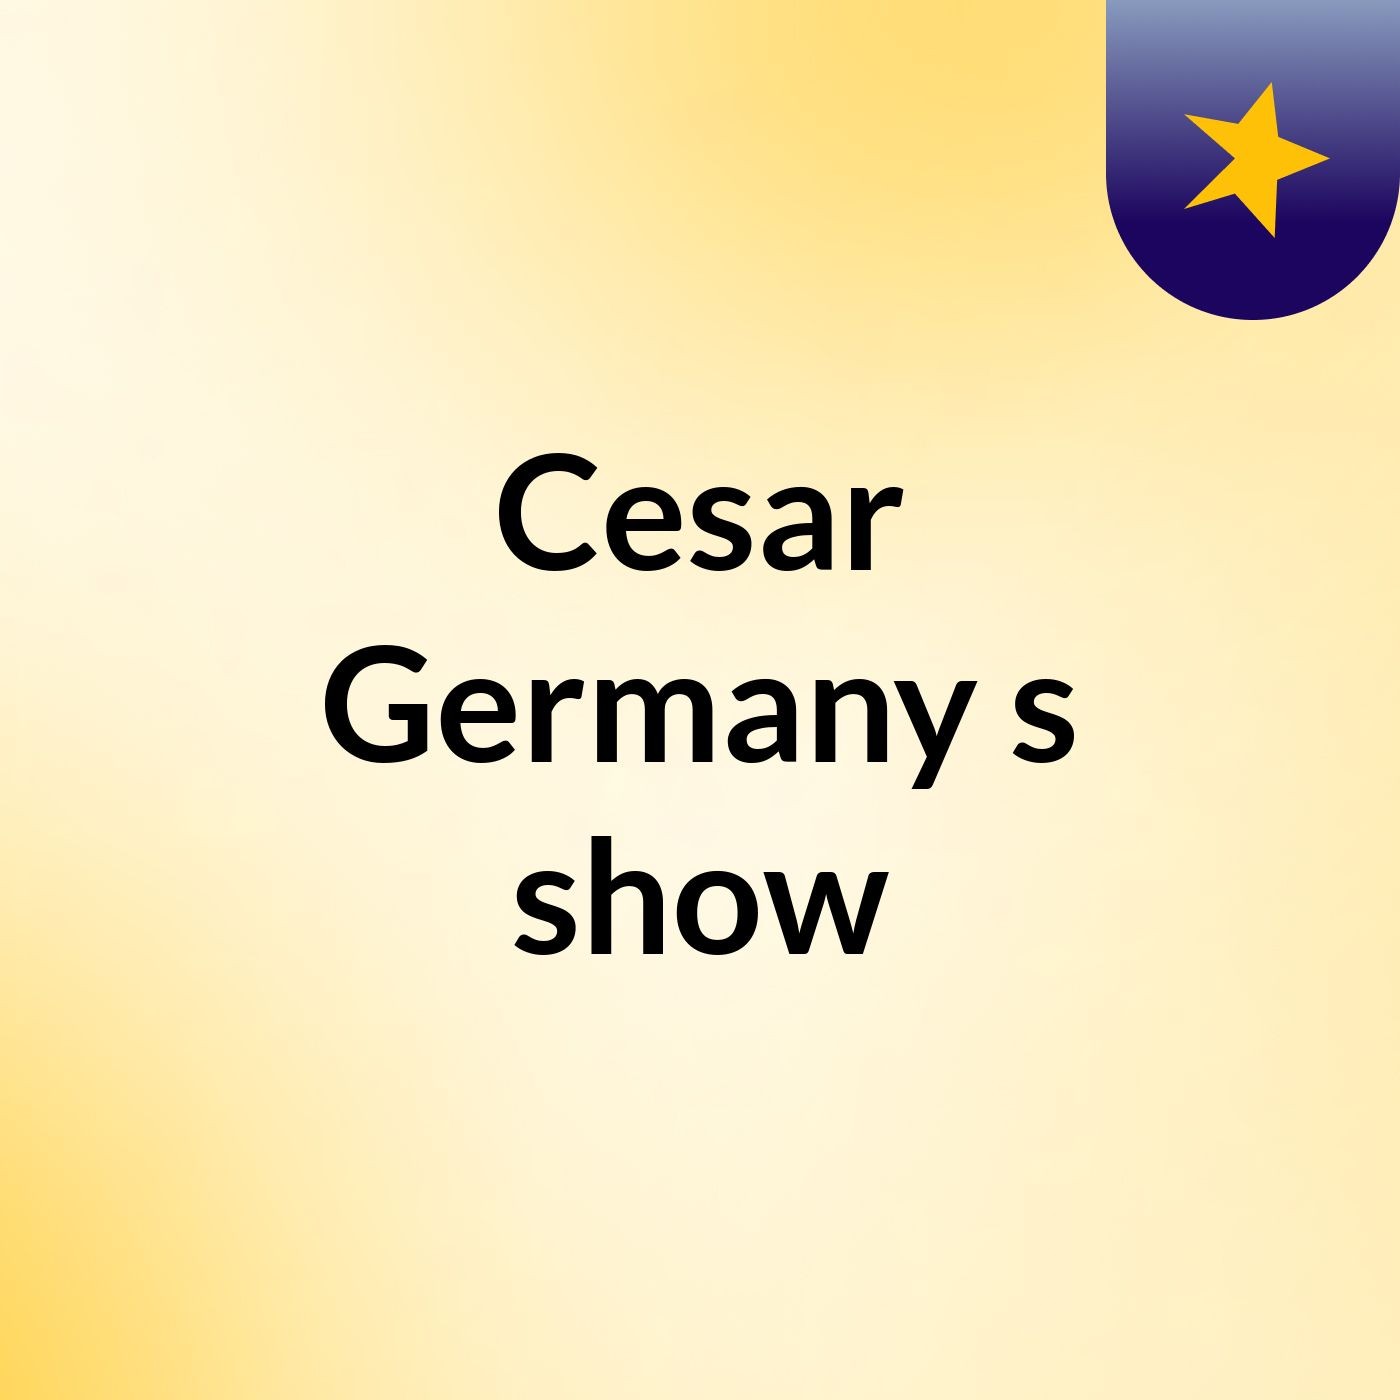 Cesar Germany's show